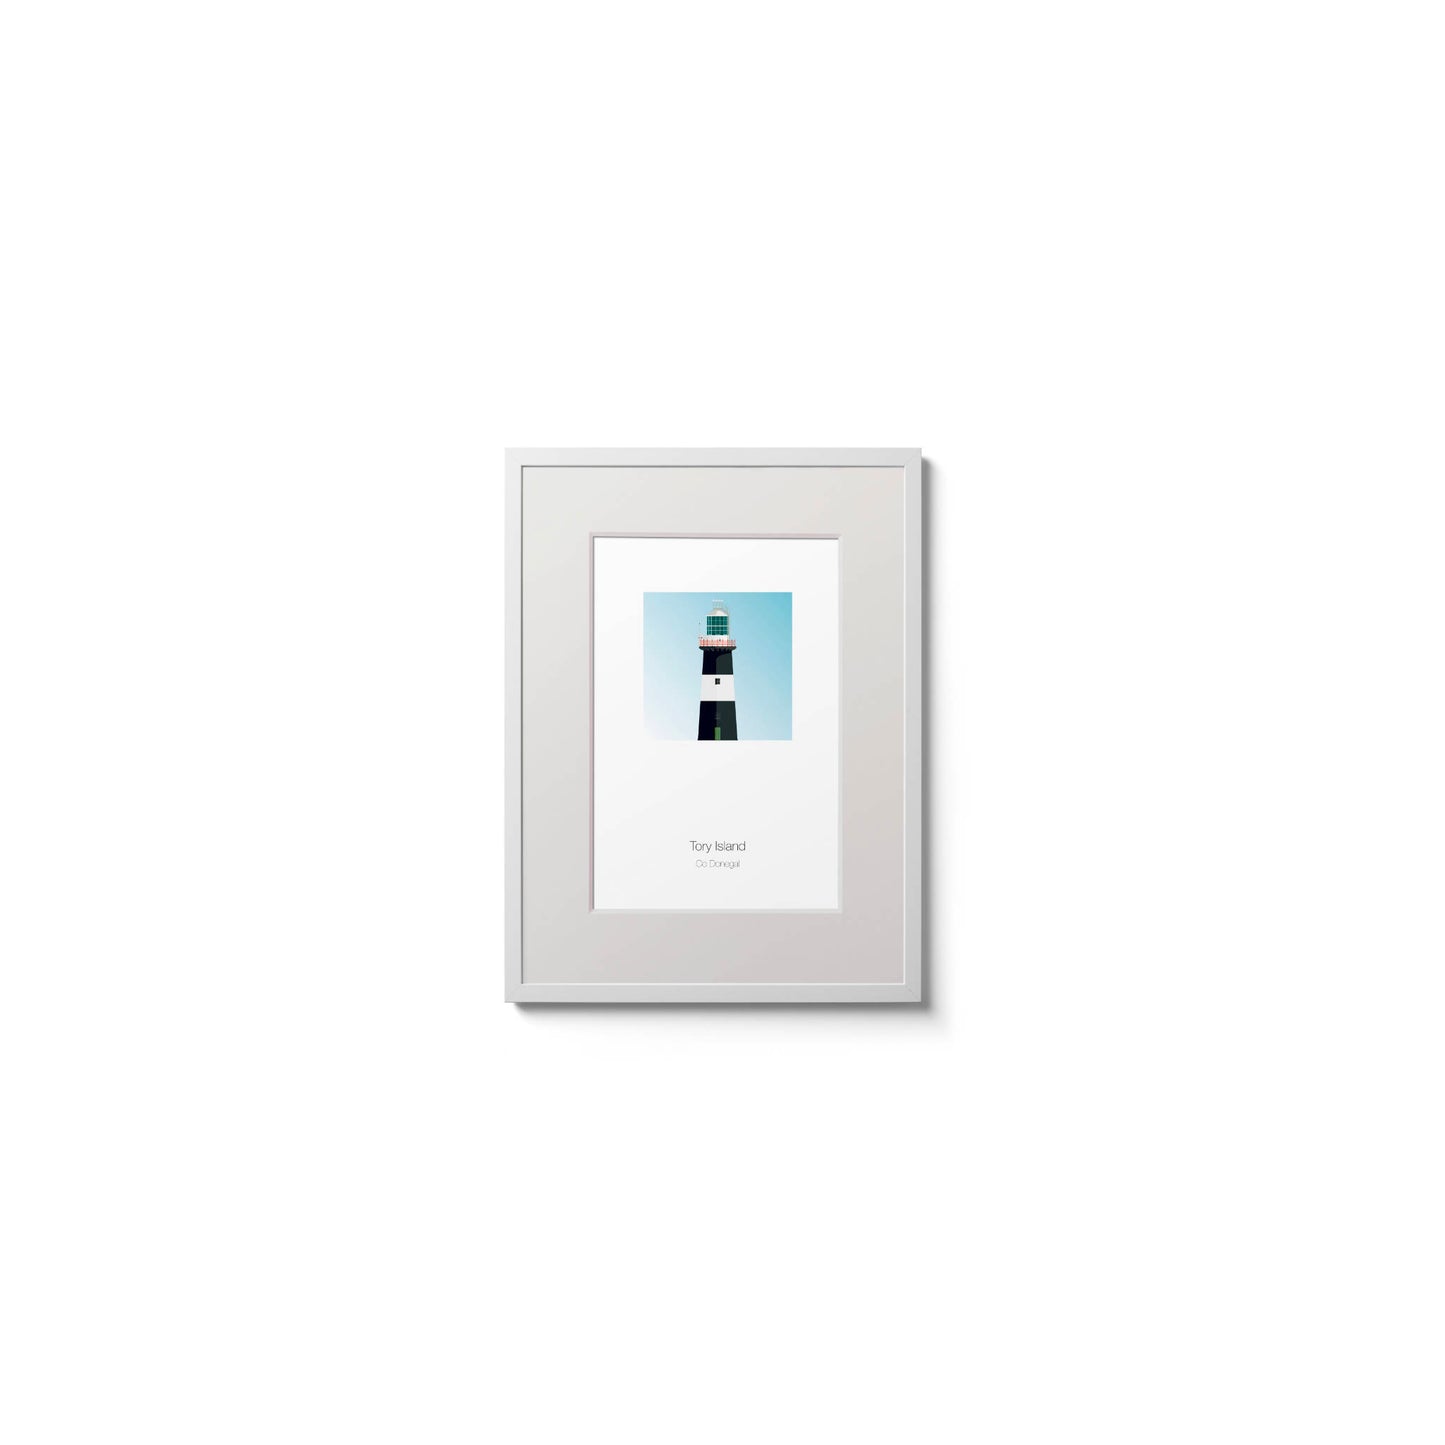 Illustration of Tory Island lighthouse on a white background inside light blue square,  in a white frame measuring 15x20cm.